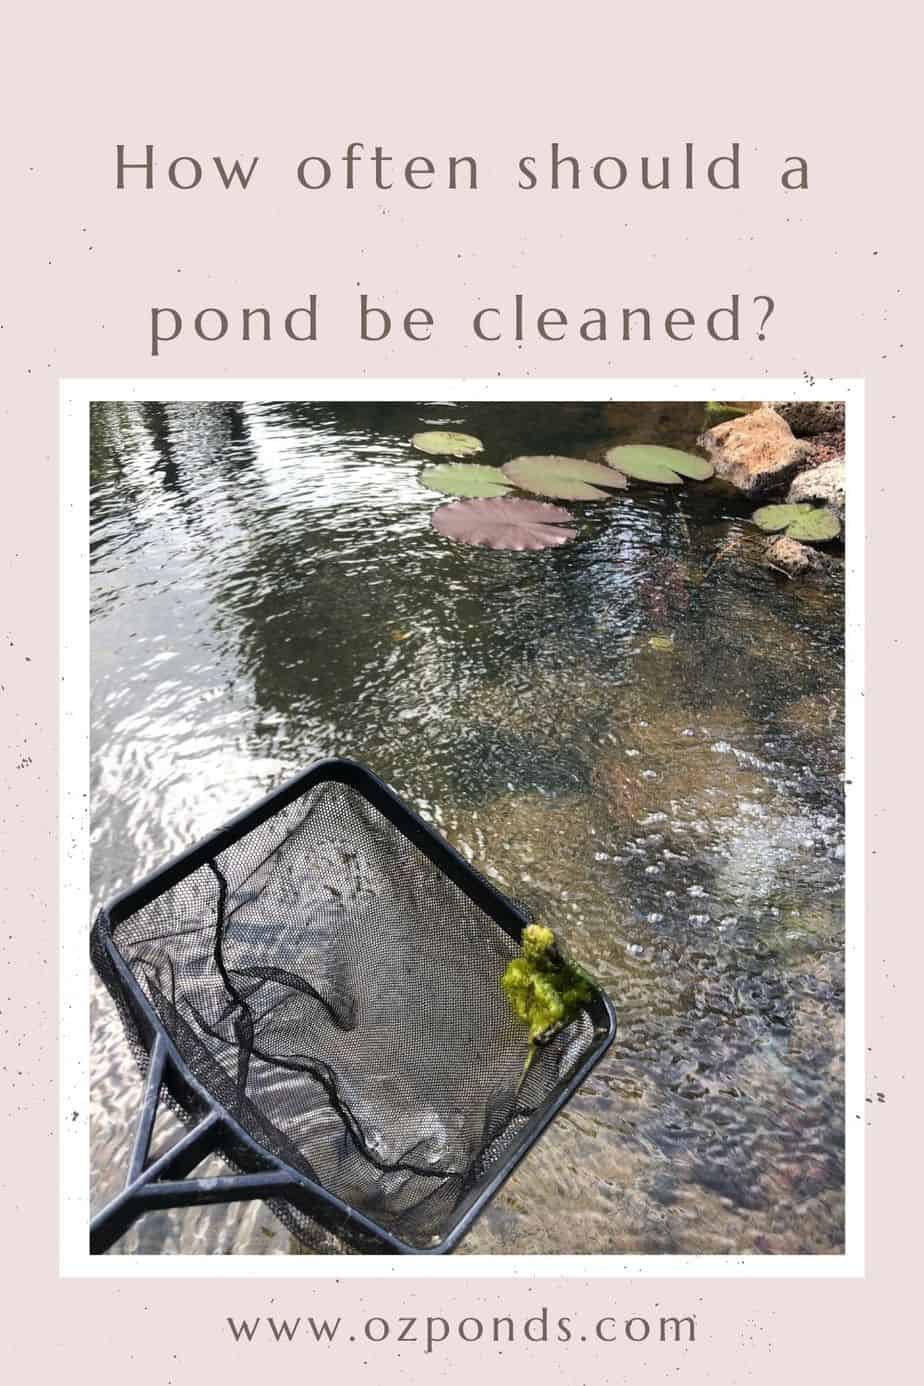 How often should a pond be cleaned?